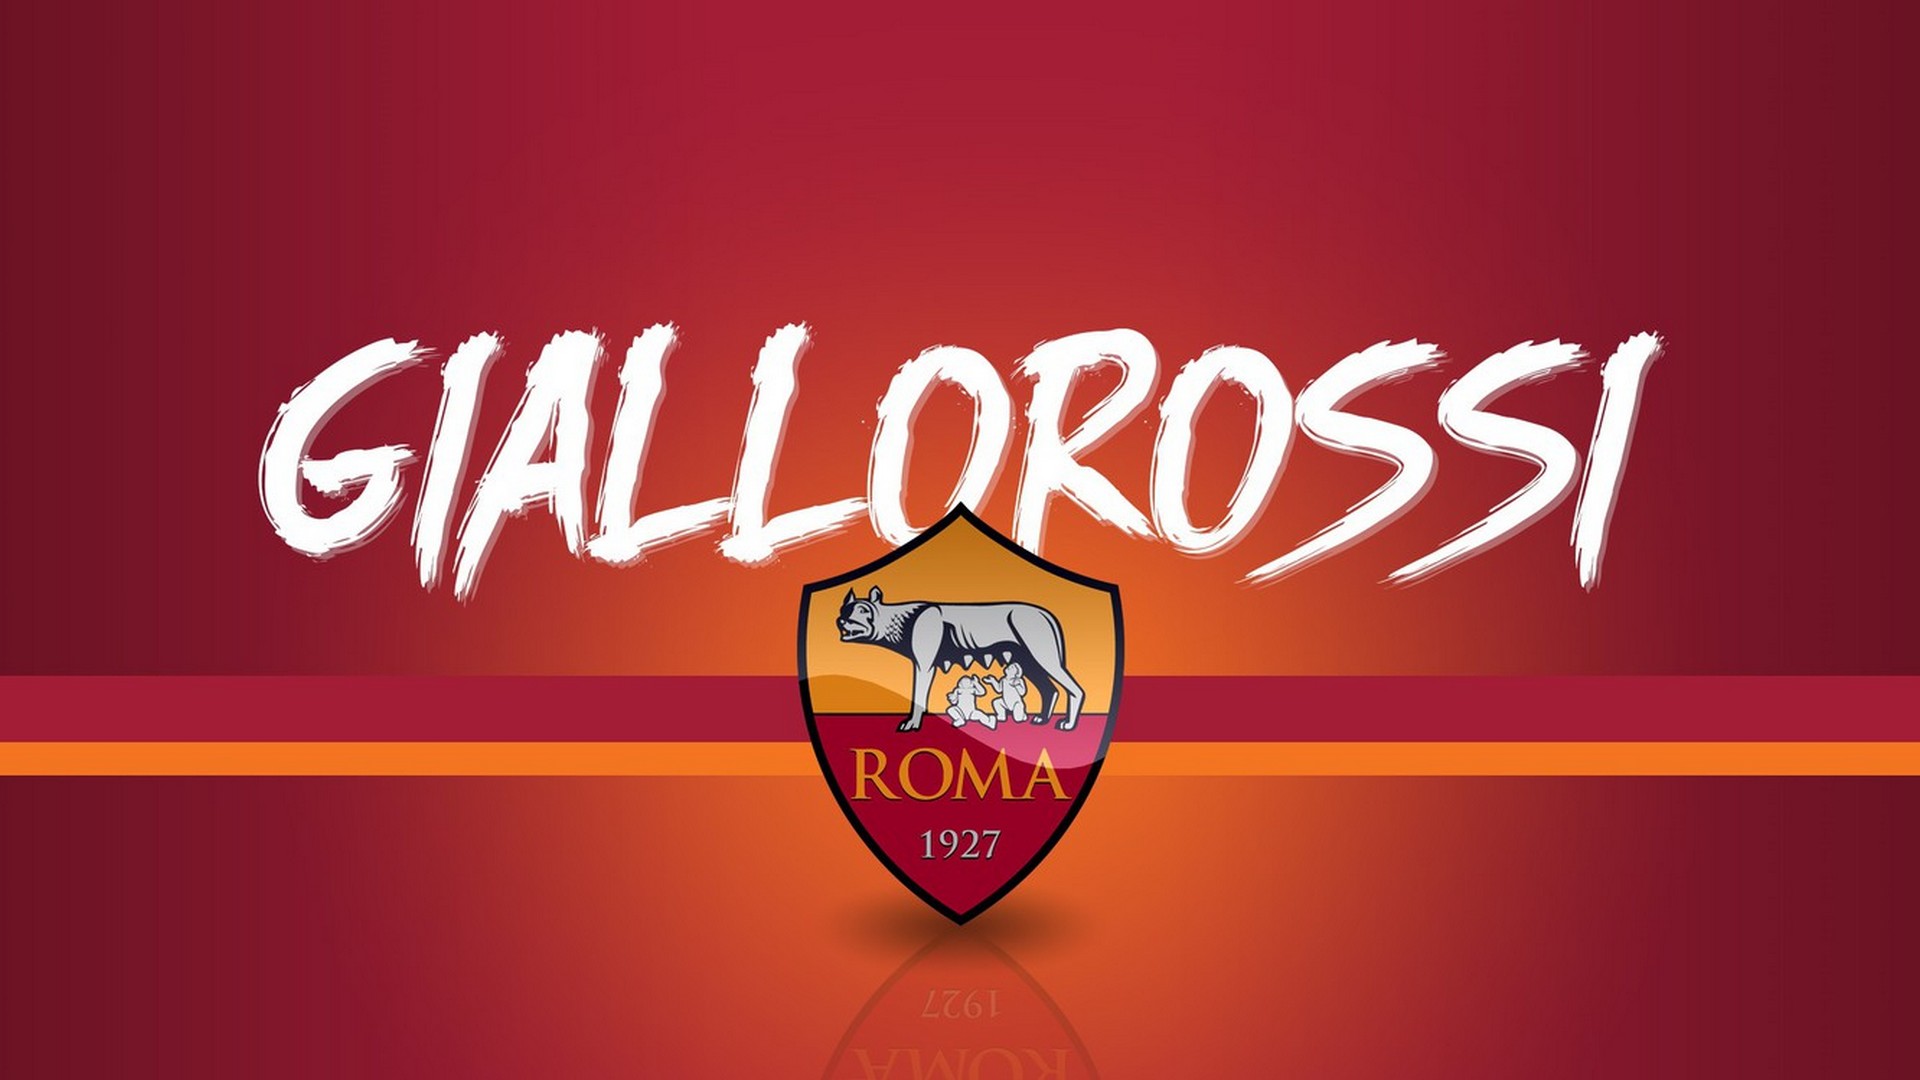 Wallpaper Desktop AS Roma HD with high-resolution 1920x1080 pixel. You can use this wallpaper for your Desktop Computers, Mac Screensavers, Windows Backgrounds, iPhone Wallpapers, Tablet or Android Lock screen and another Mobile device